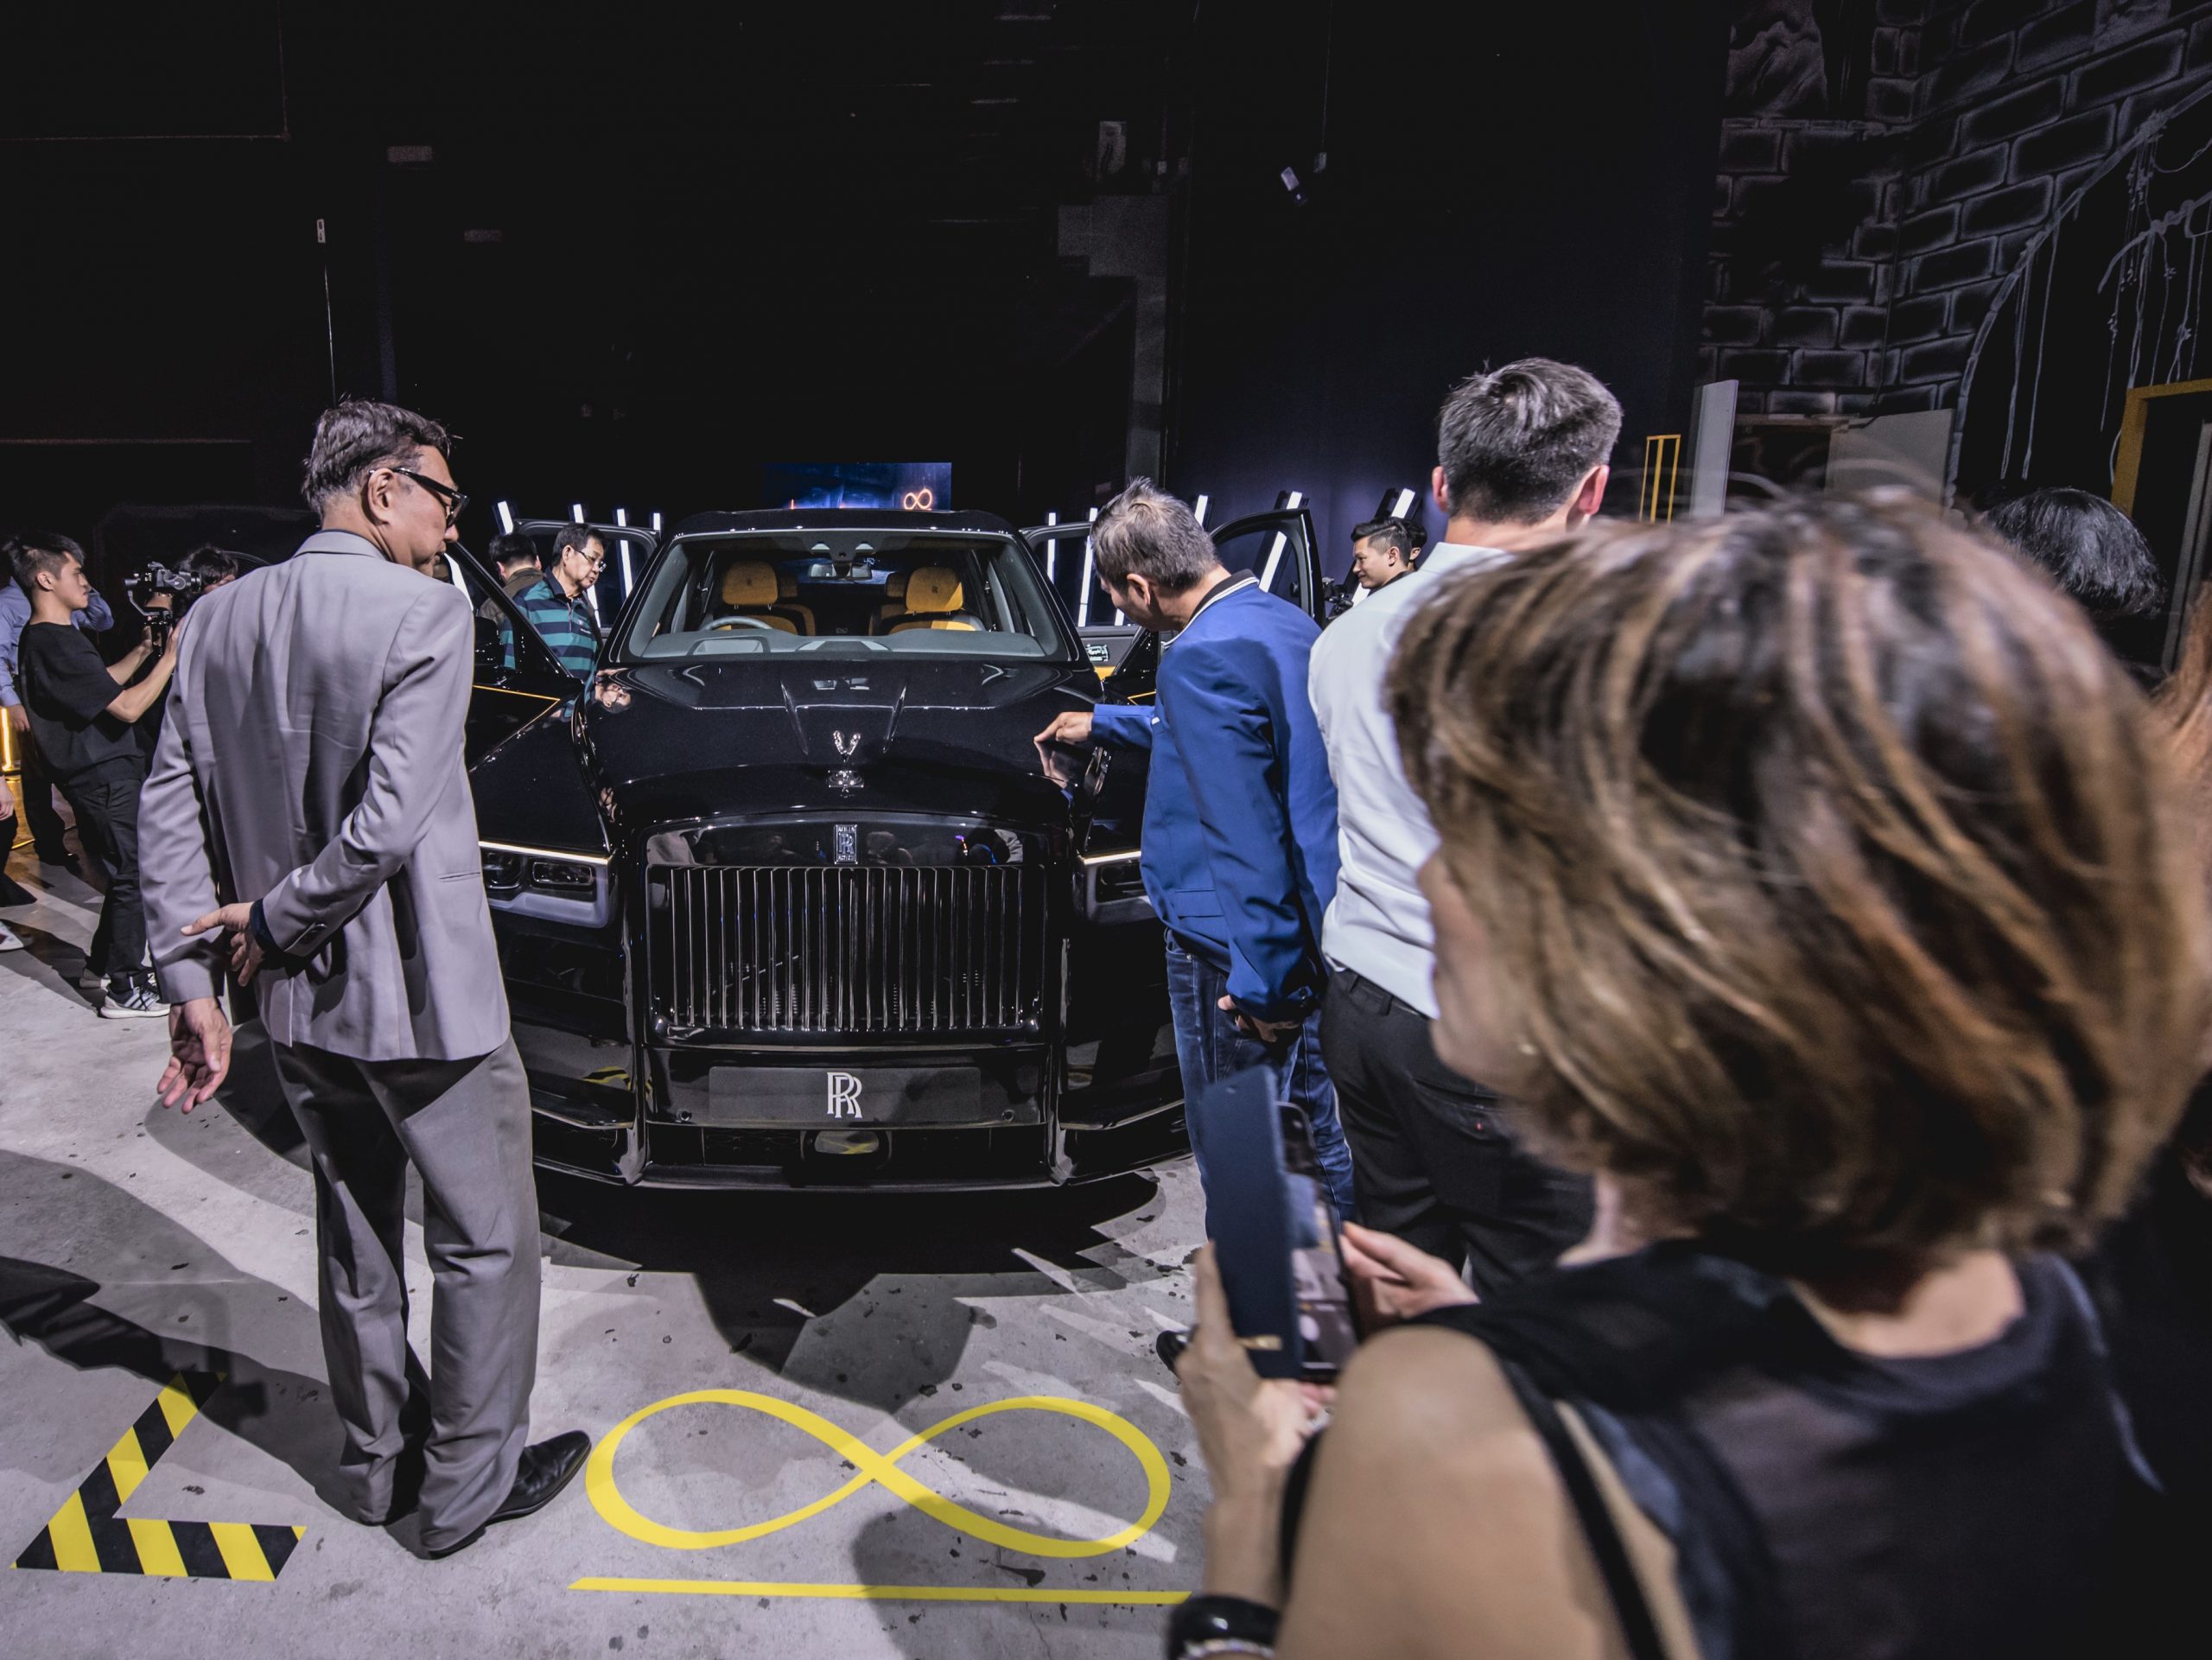 The guests had the opportunity to view the Roll-Royce Black Badge Cullinan up close